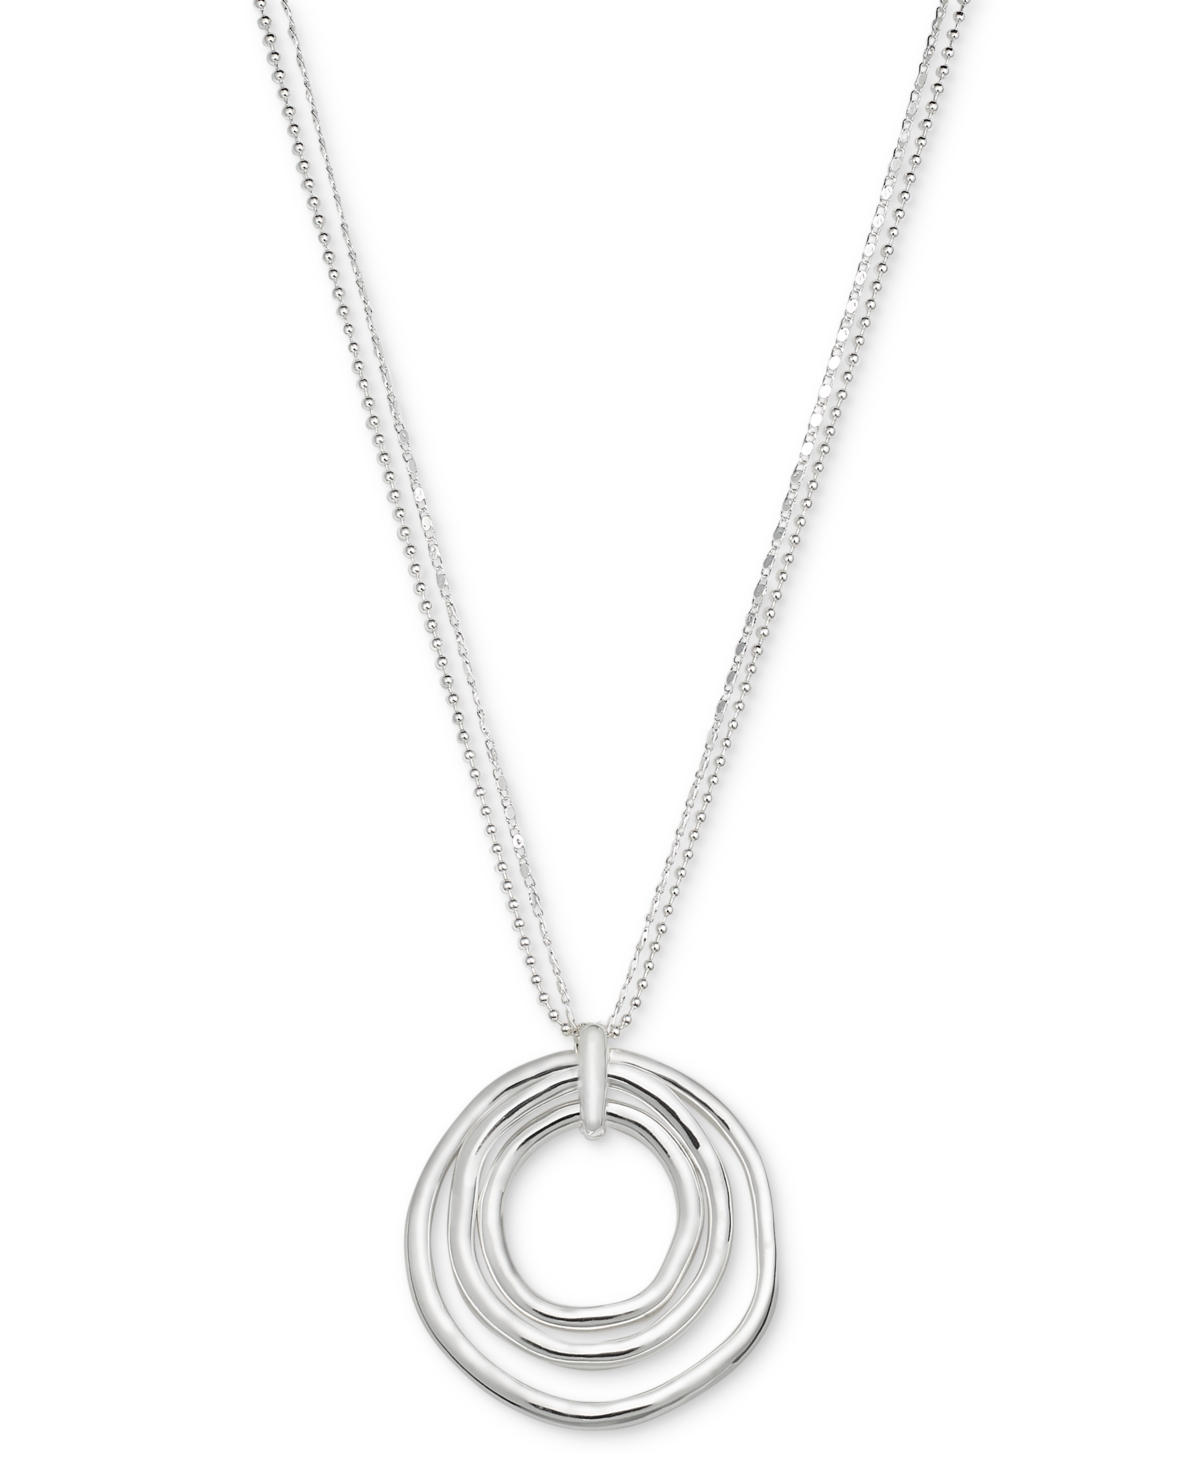 Silver-Tone Circle Pendant Necklace, 36"+ 3" extender, Created for Macy's - Silver